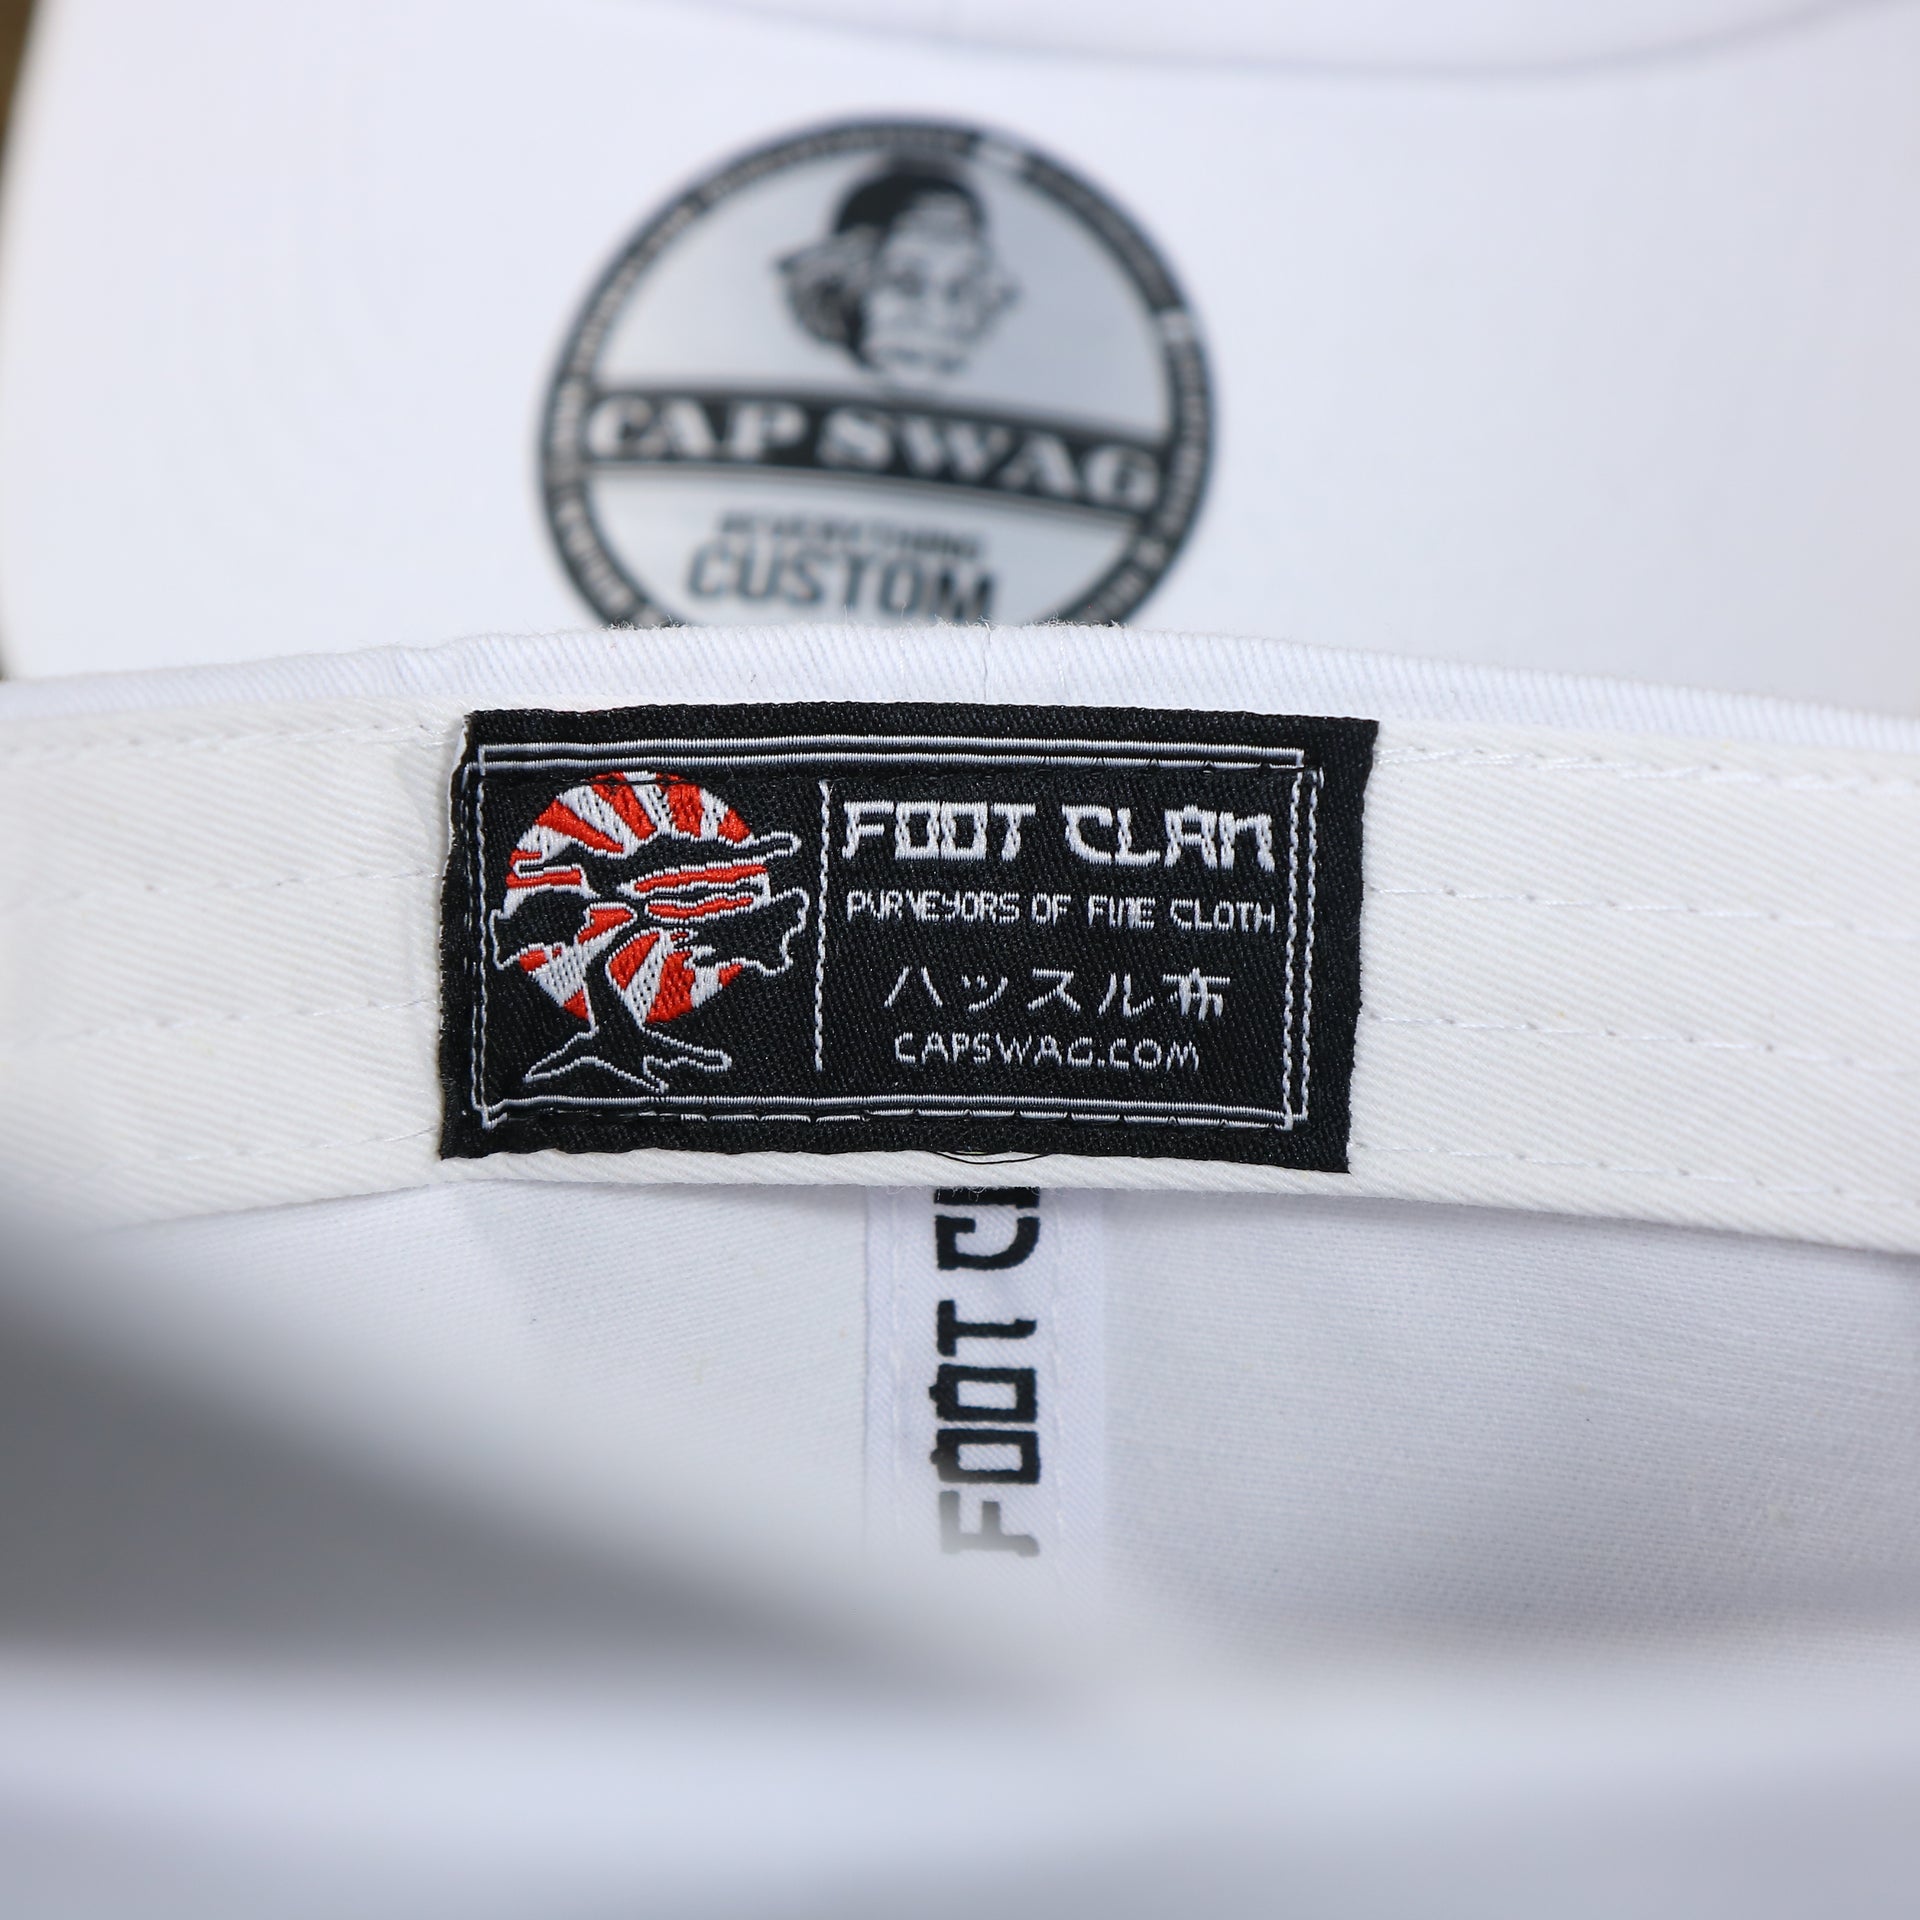 The Foot Clan Tag on the Snow White Blank Baseball Hat | White Dad Hat